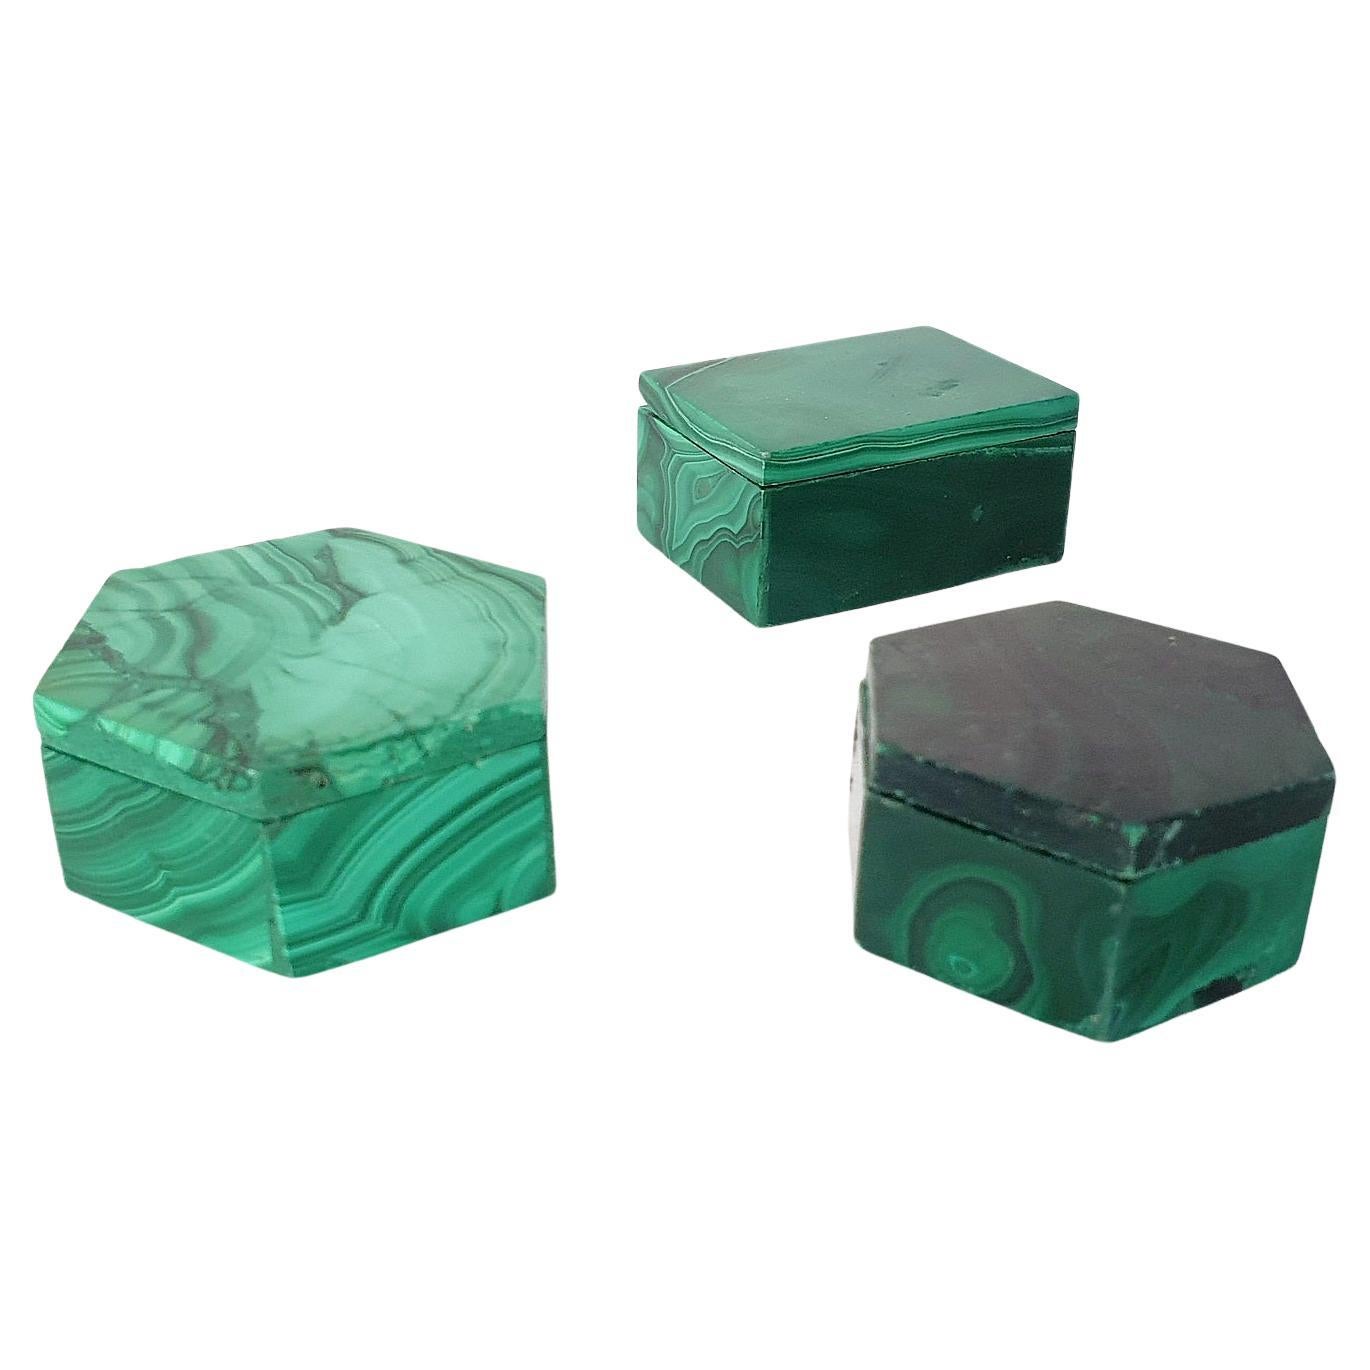 A set consisting of three handmade miniature boxes of malachite originating from Congo, Africa. Two boxes are hexagon and one is rectangular.